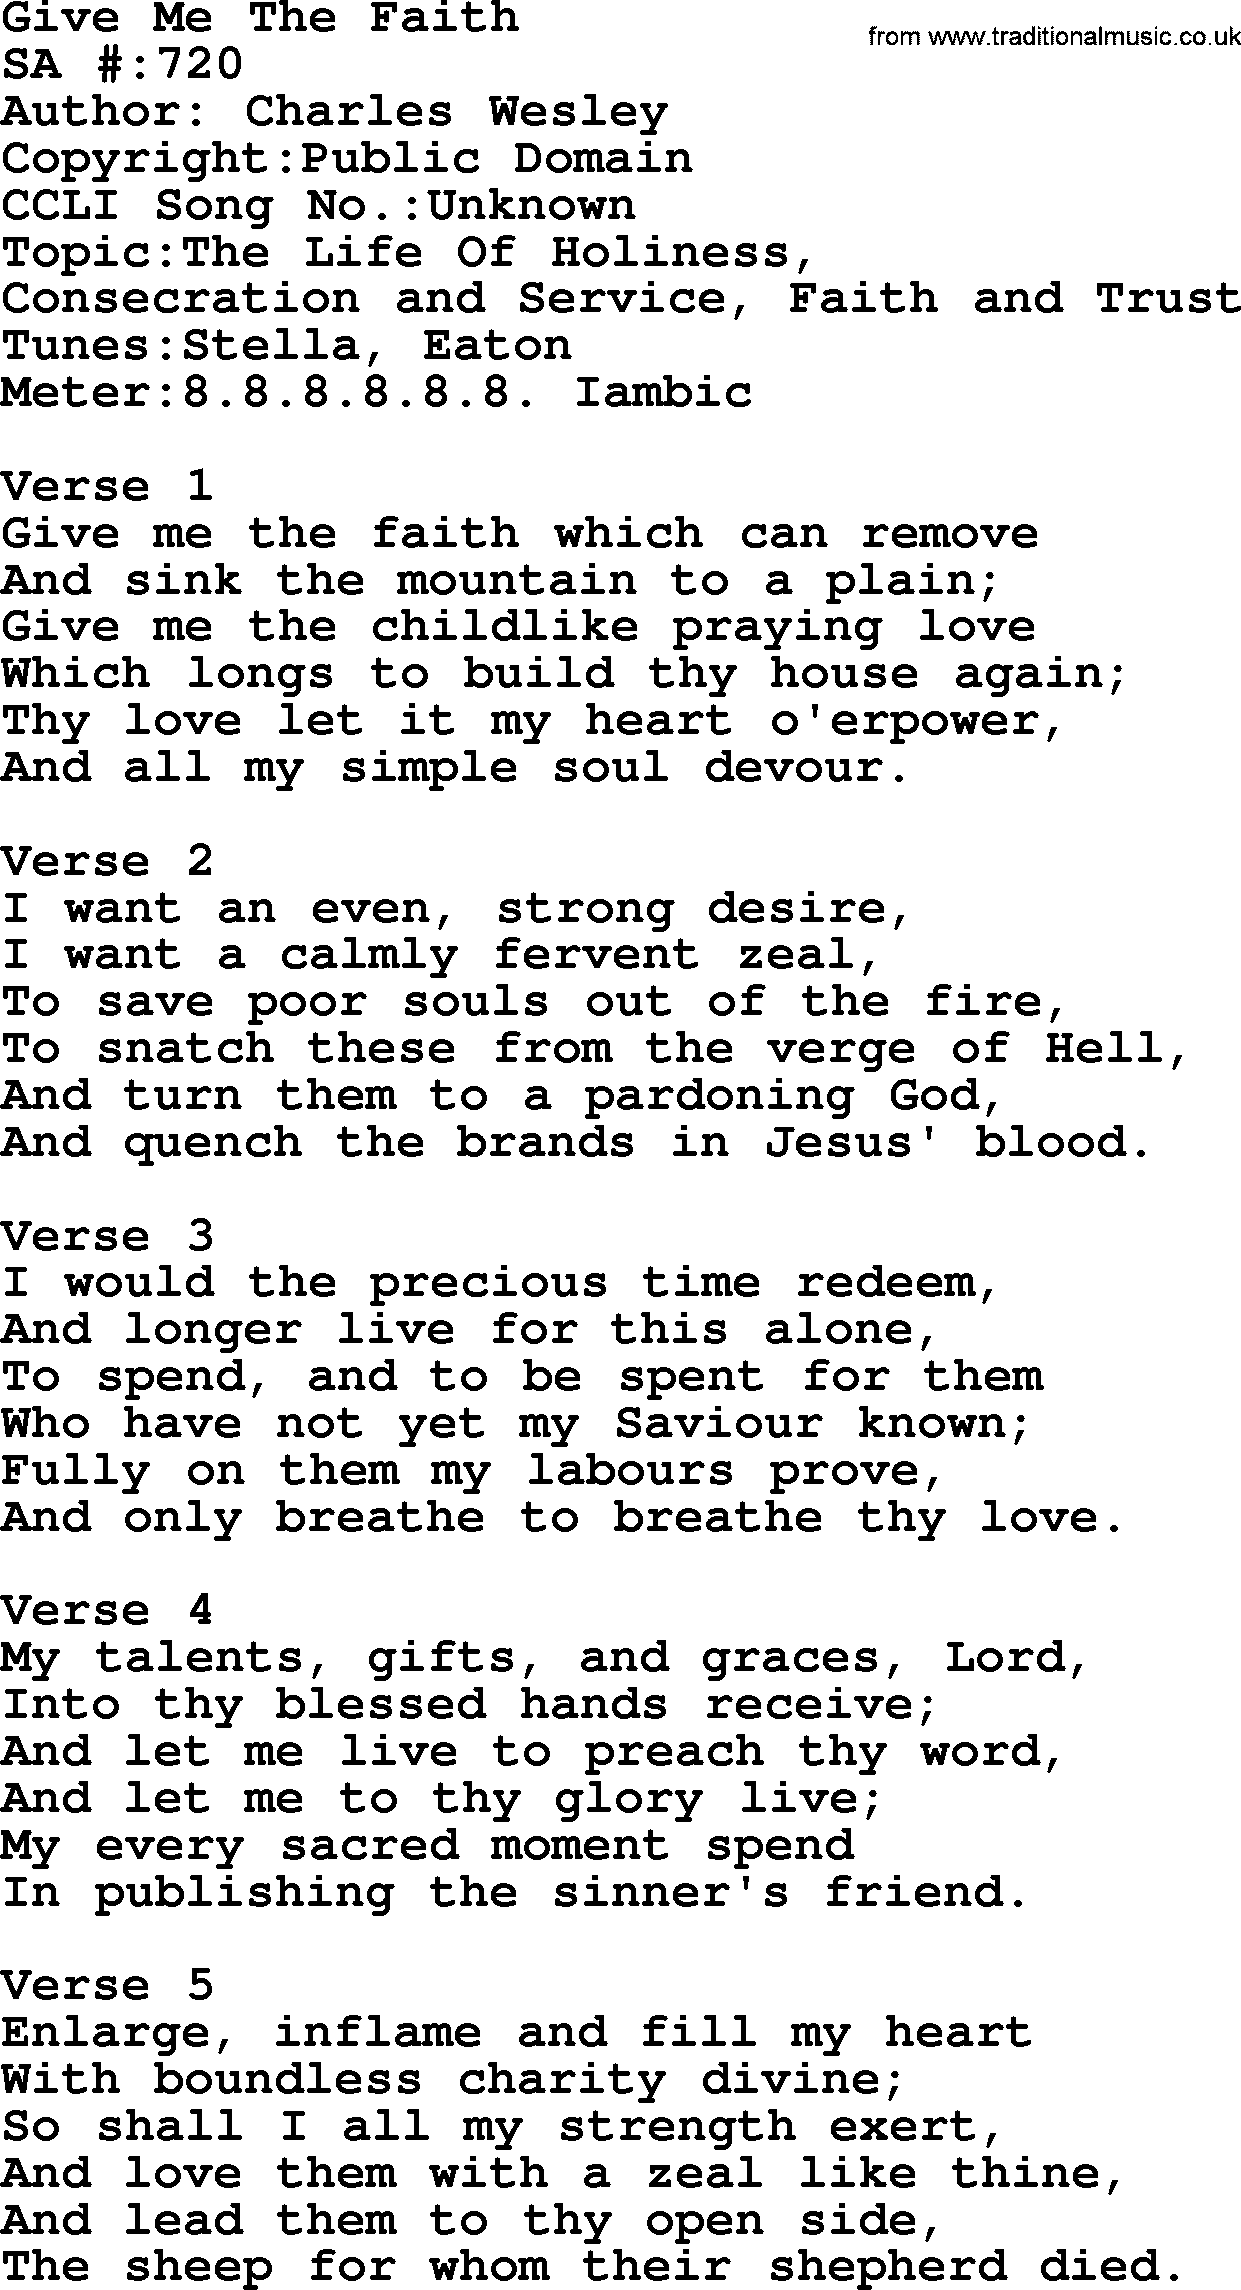 Salvation Army Hymnal, title: Give Me The Faith, with lyrics and PDF,